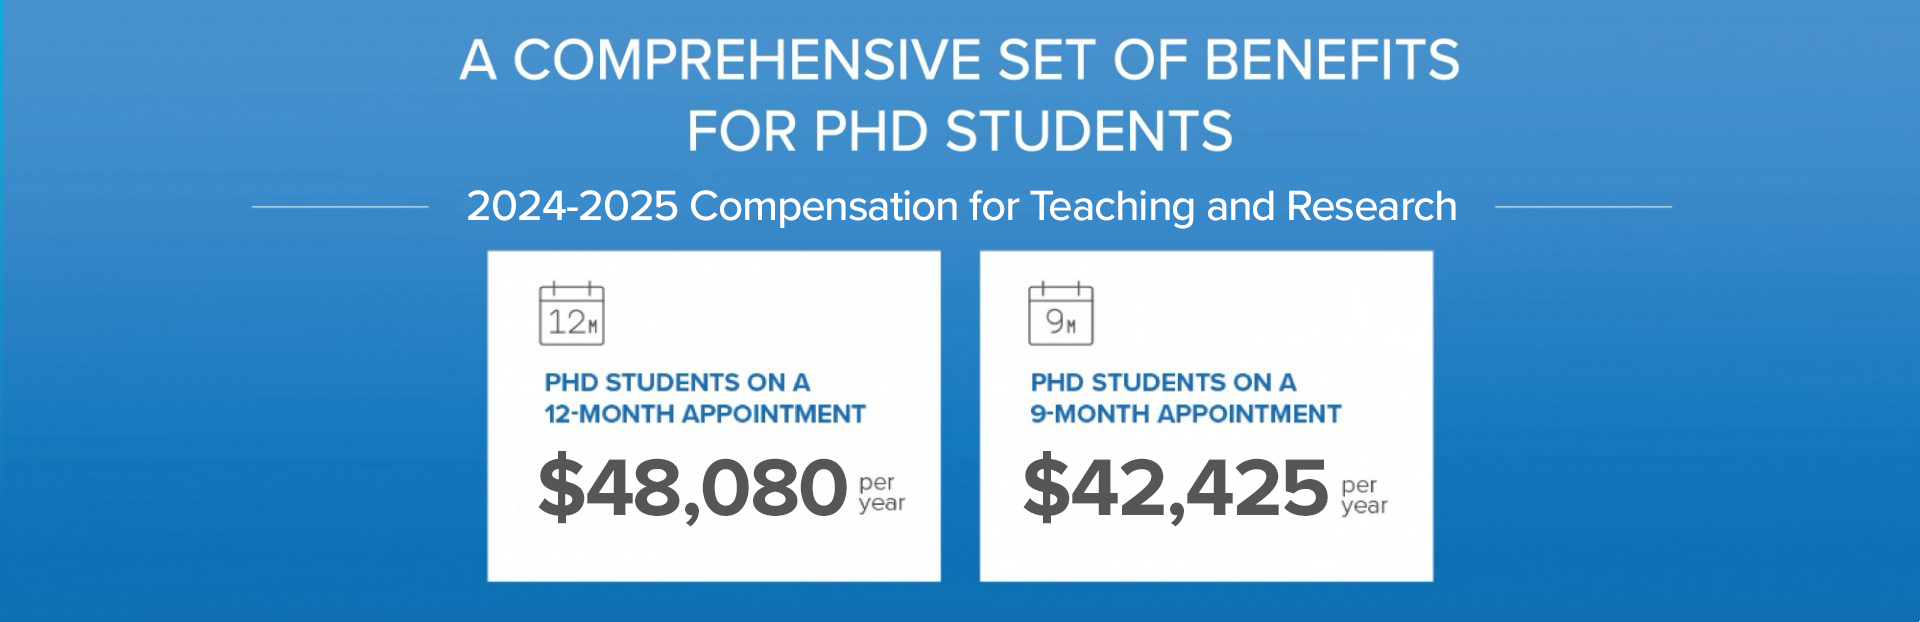 2024-2025 Stipends for PhD Students